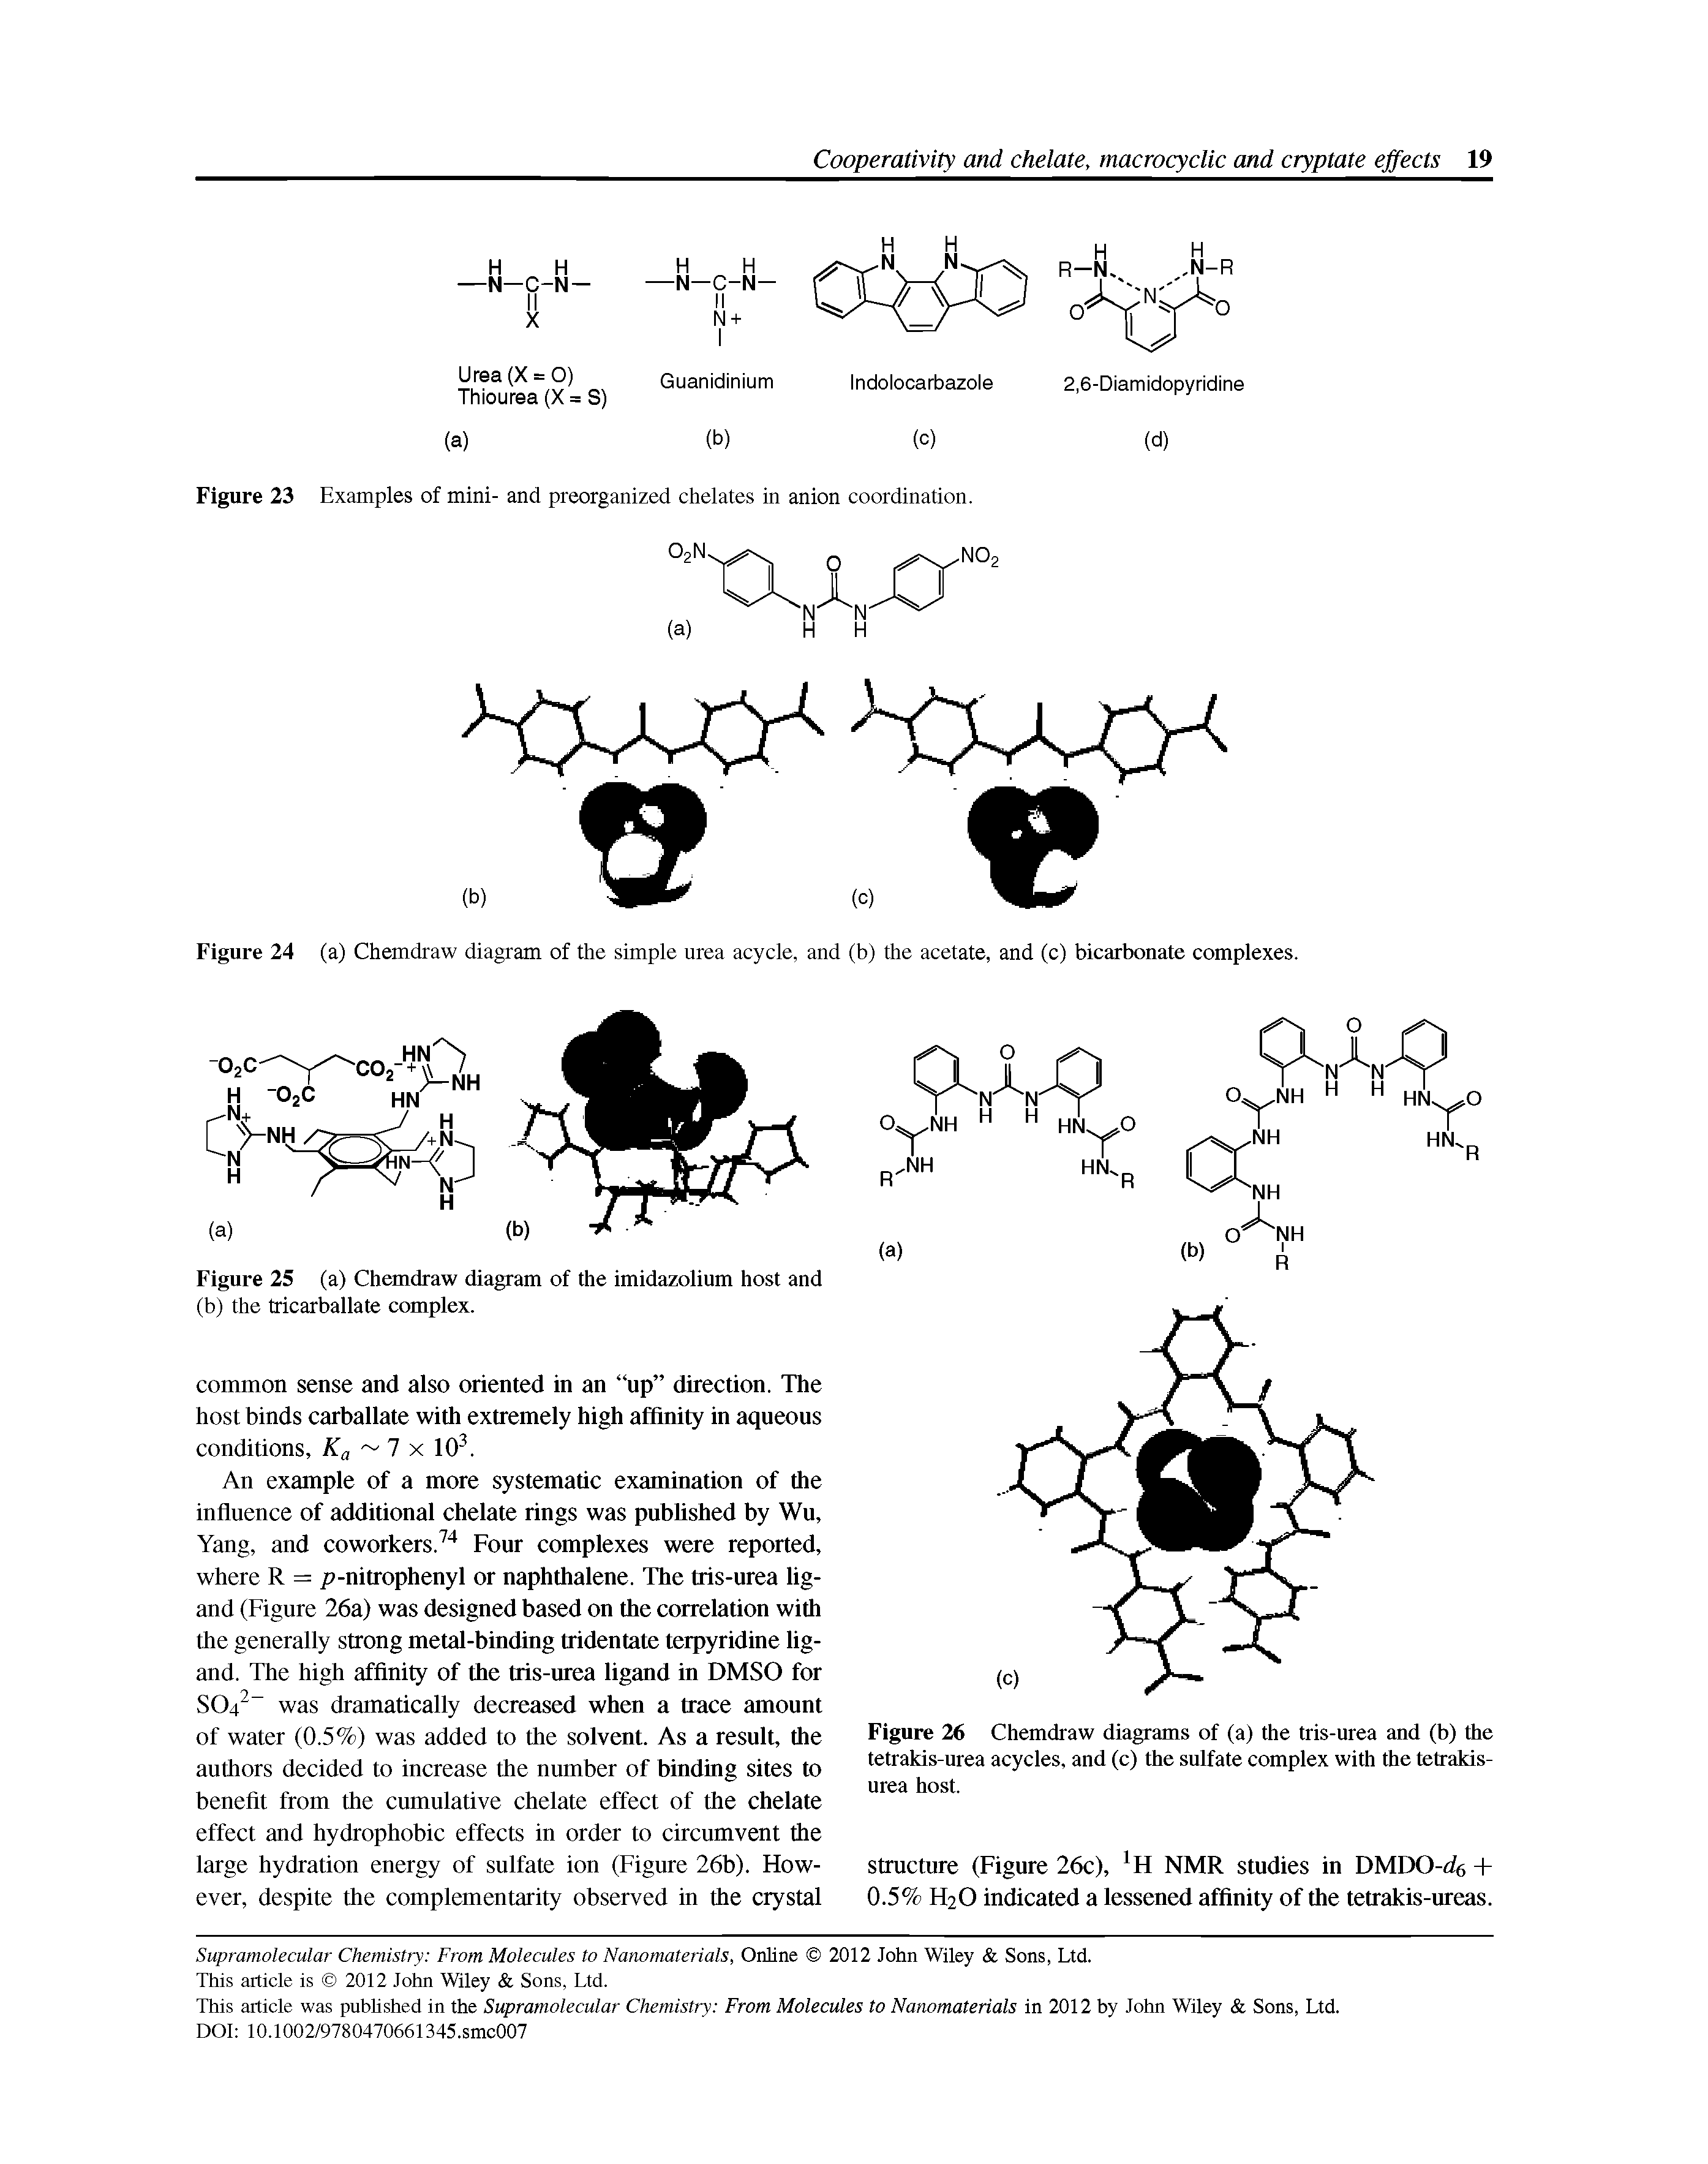 Figure 26 Chemdraw diagrams of (a) the tris-urea and (b) the tetrakis-urea acycles, and (c) the sulfate complex with the tetrakis-urea host.